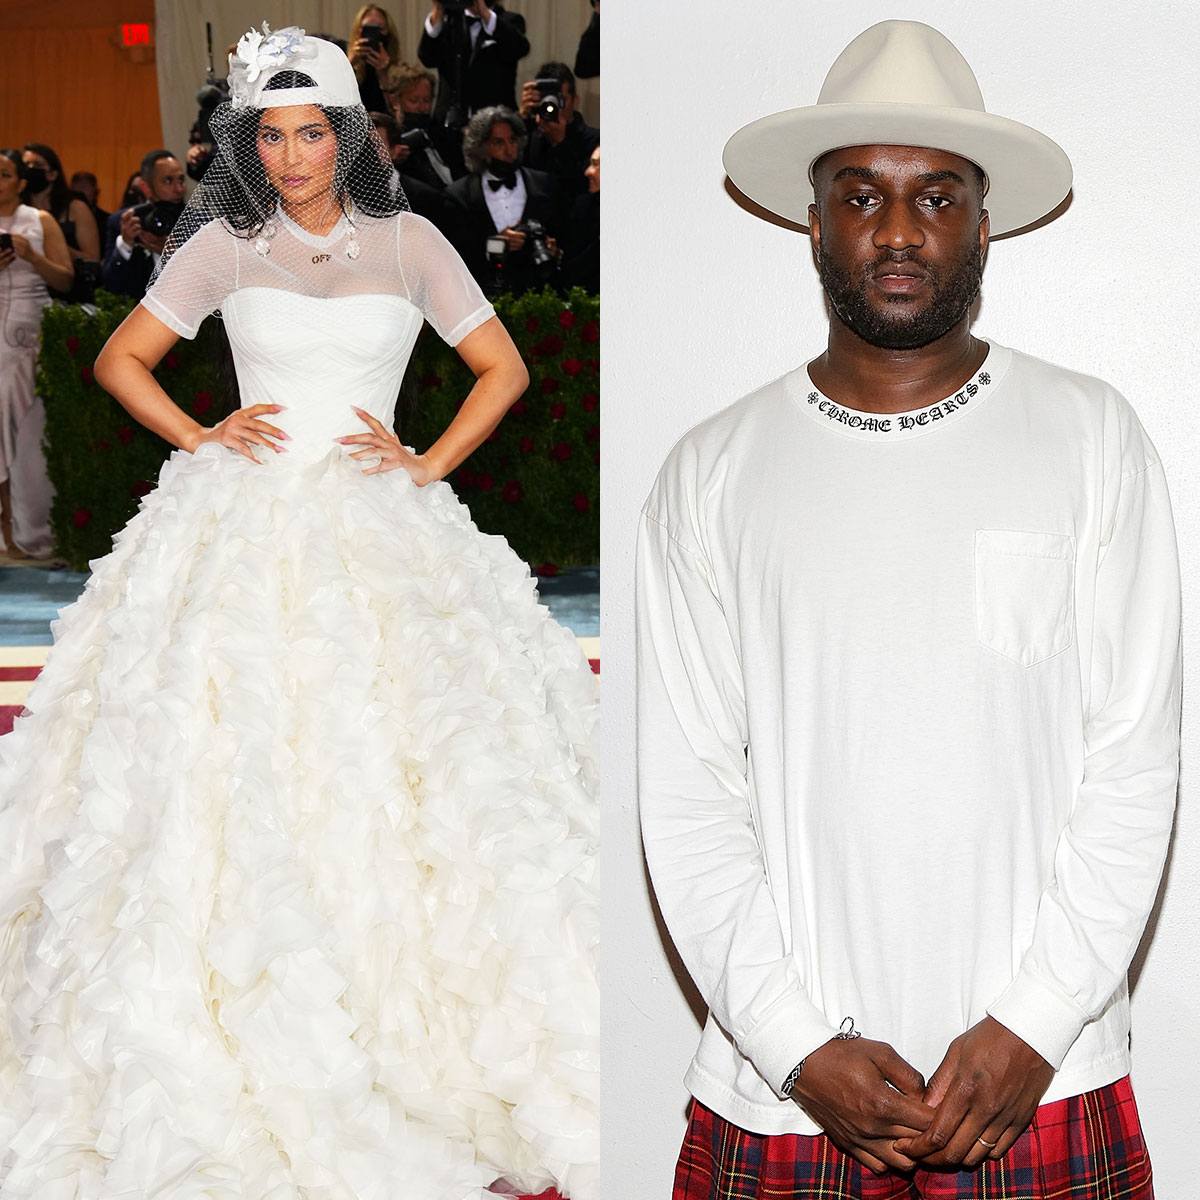 Met Gala 2022: Kylie Jenner's outfit a tribute to Virgil Abloh